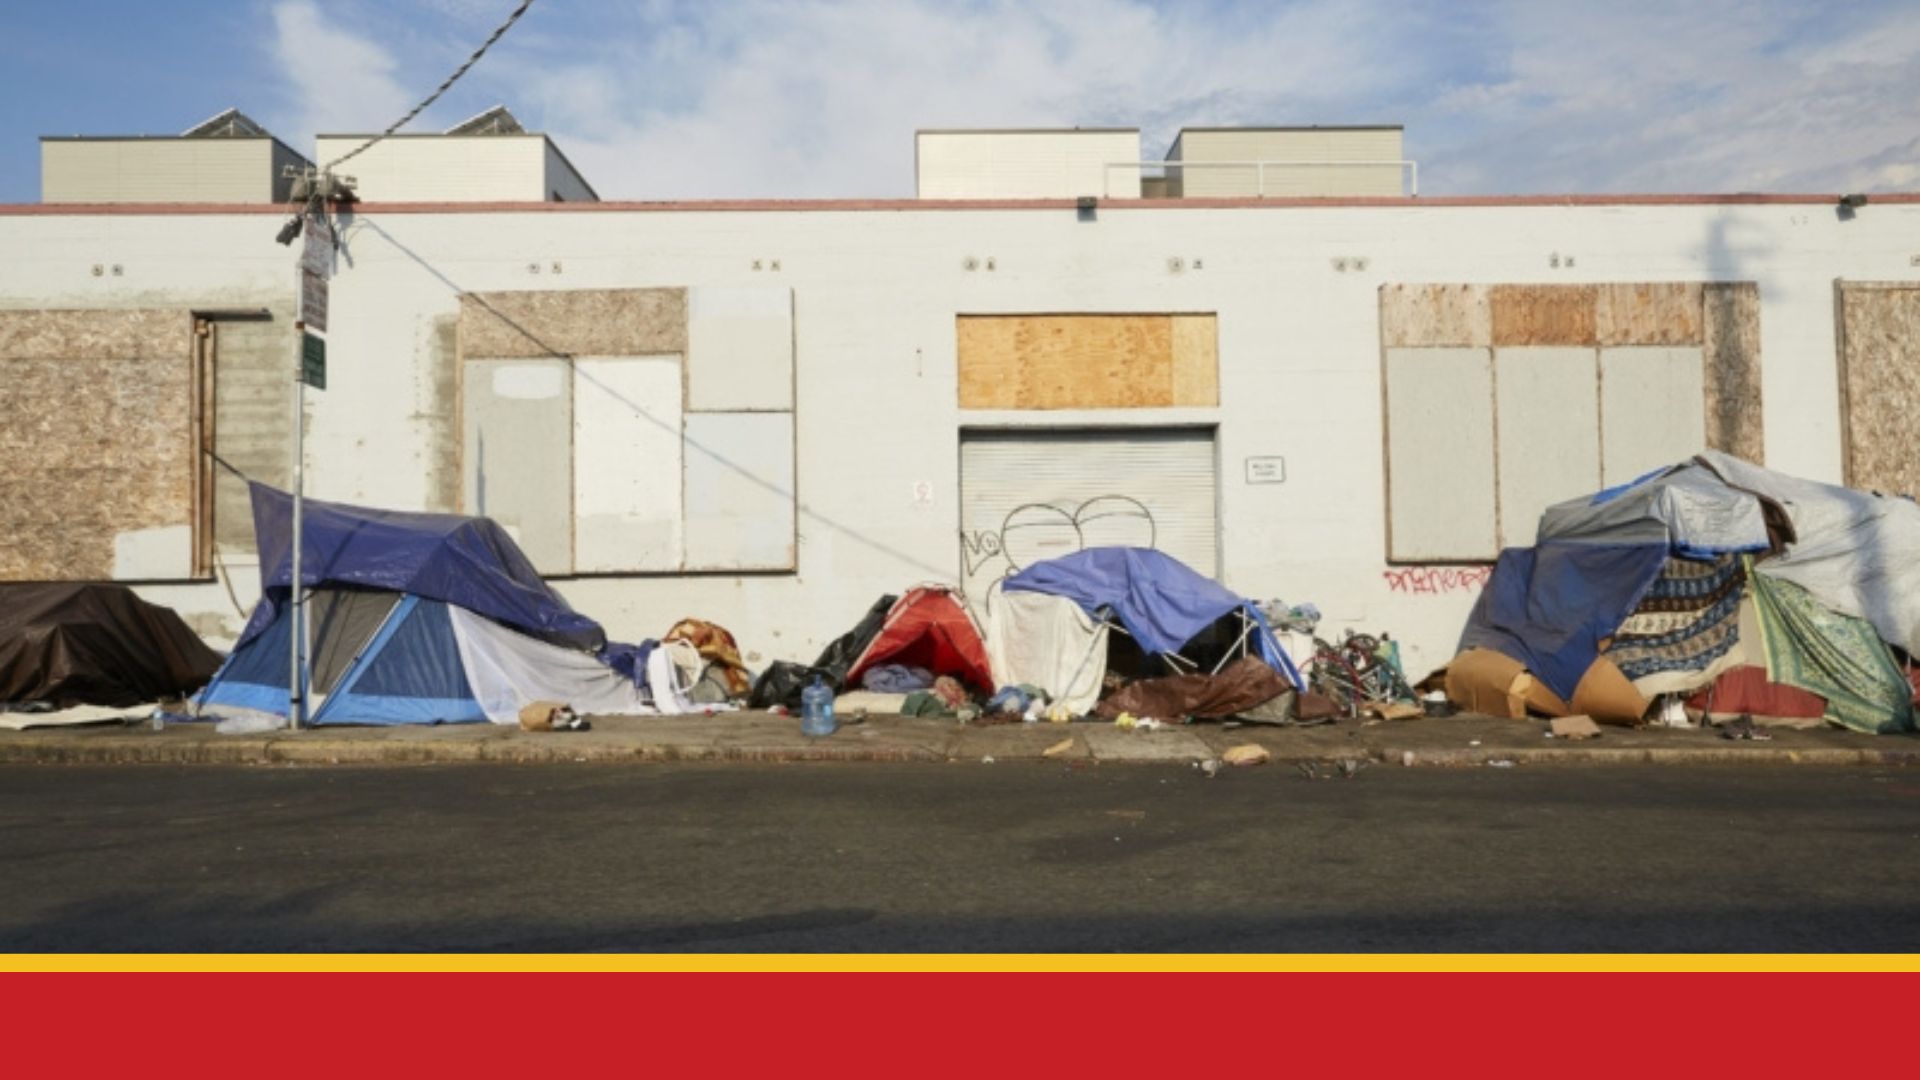 A California city was making a difference on homelessness. Then the money ran out - PublicCEO